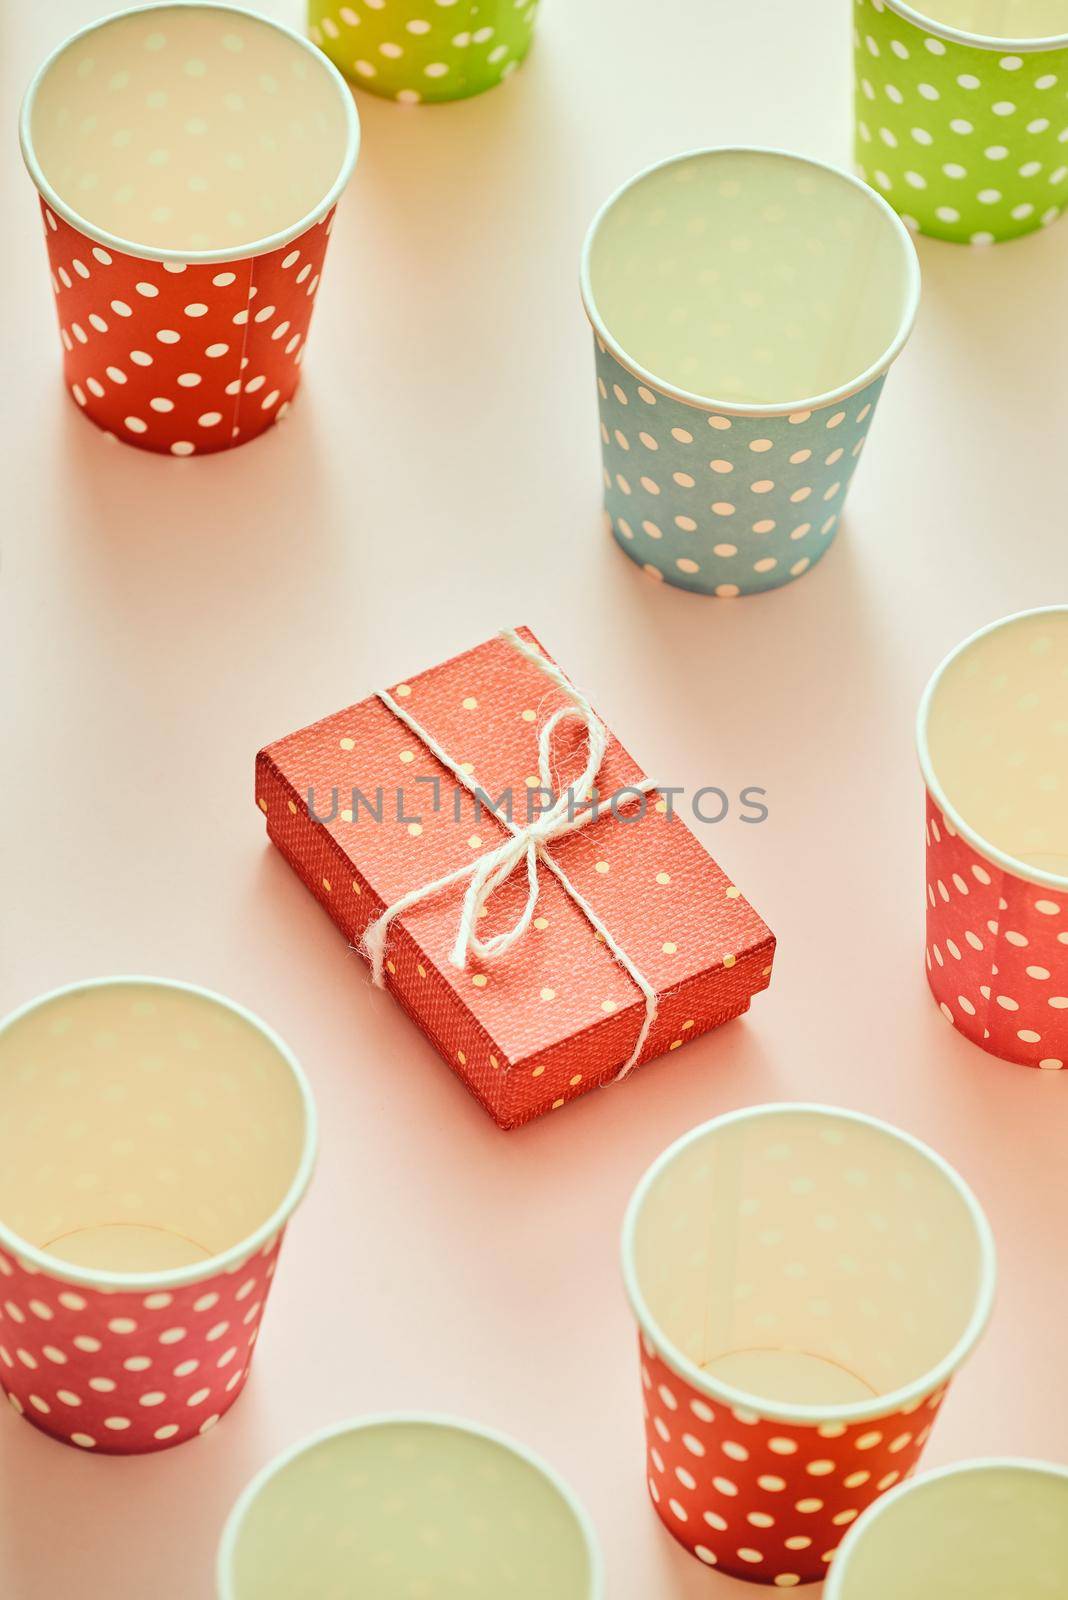 Cups and gift boxes wrapped in polka dots colorful paper